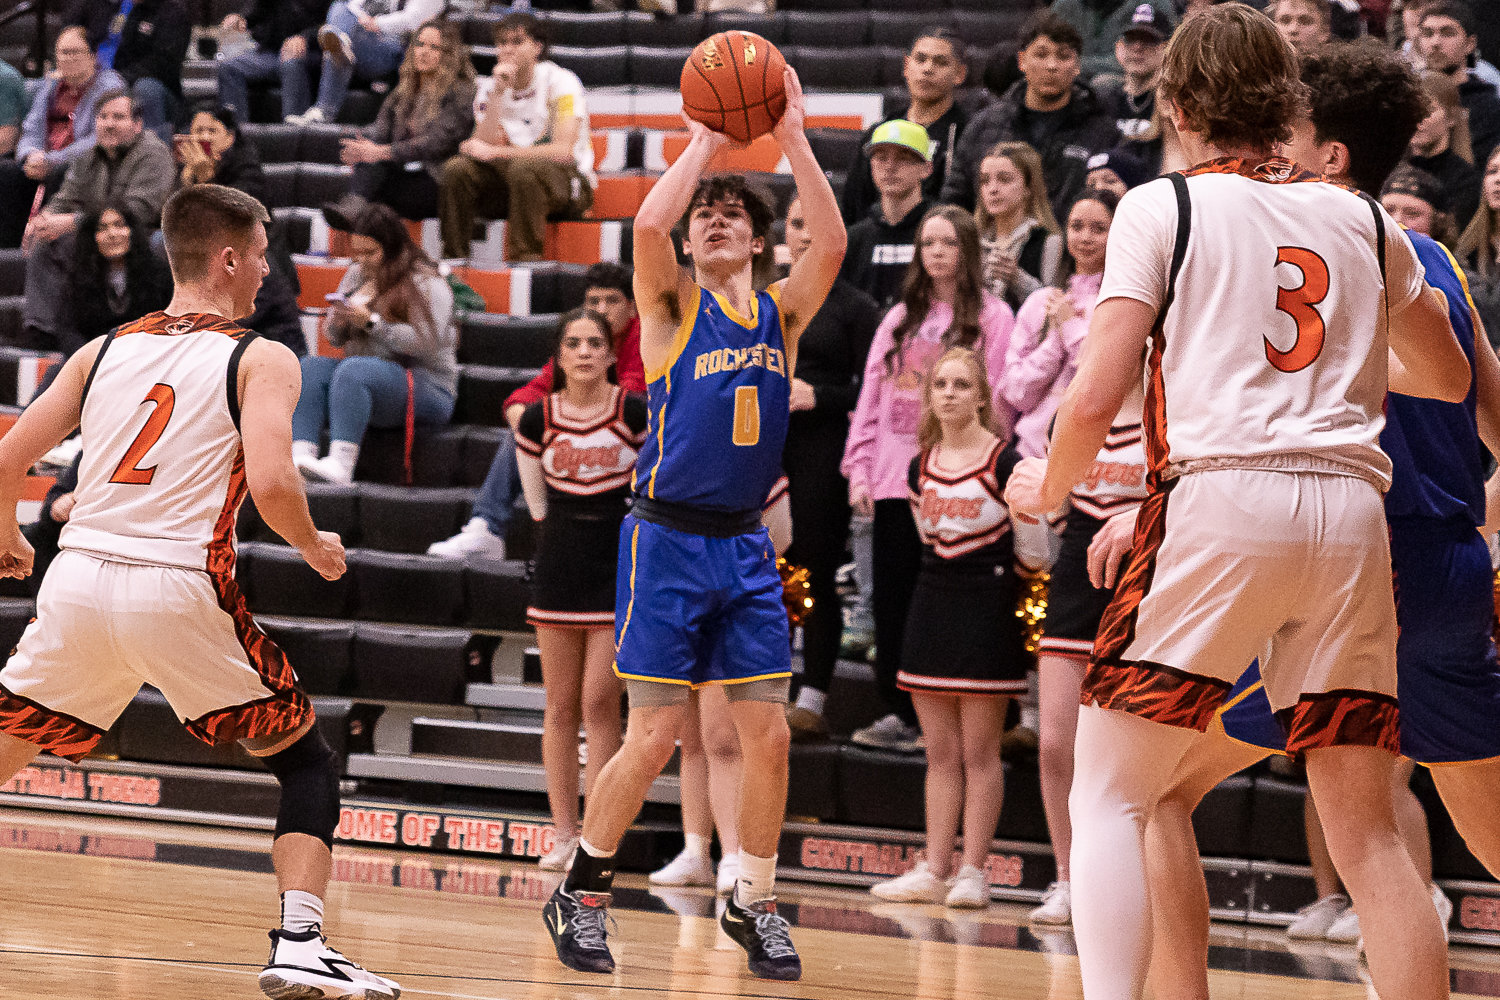 Rochester guard Carson Rotter takes a 3-pointer against Centralia Jan. 19.